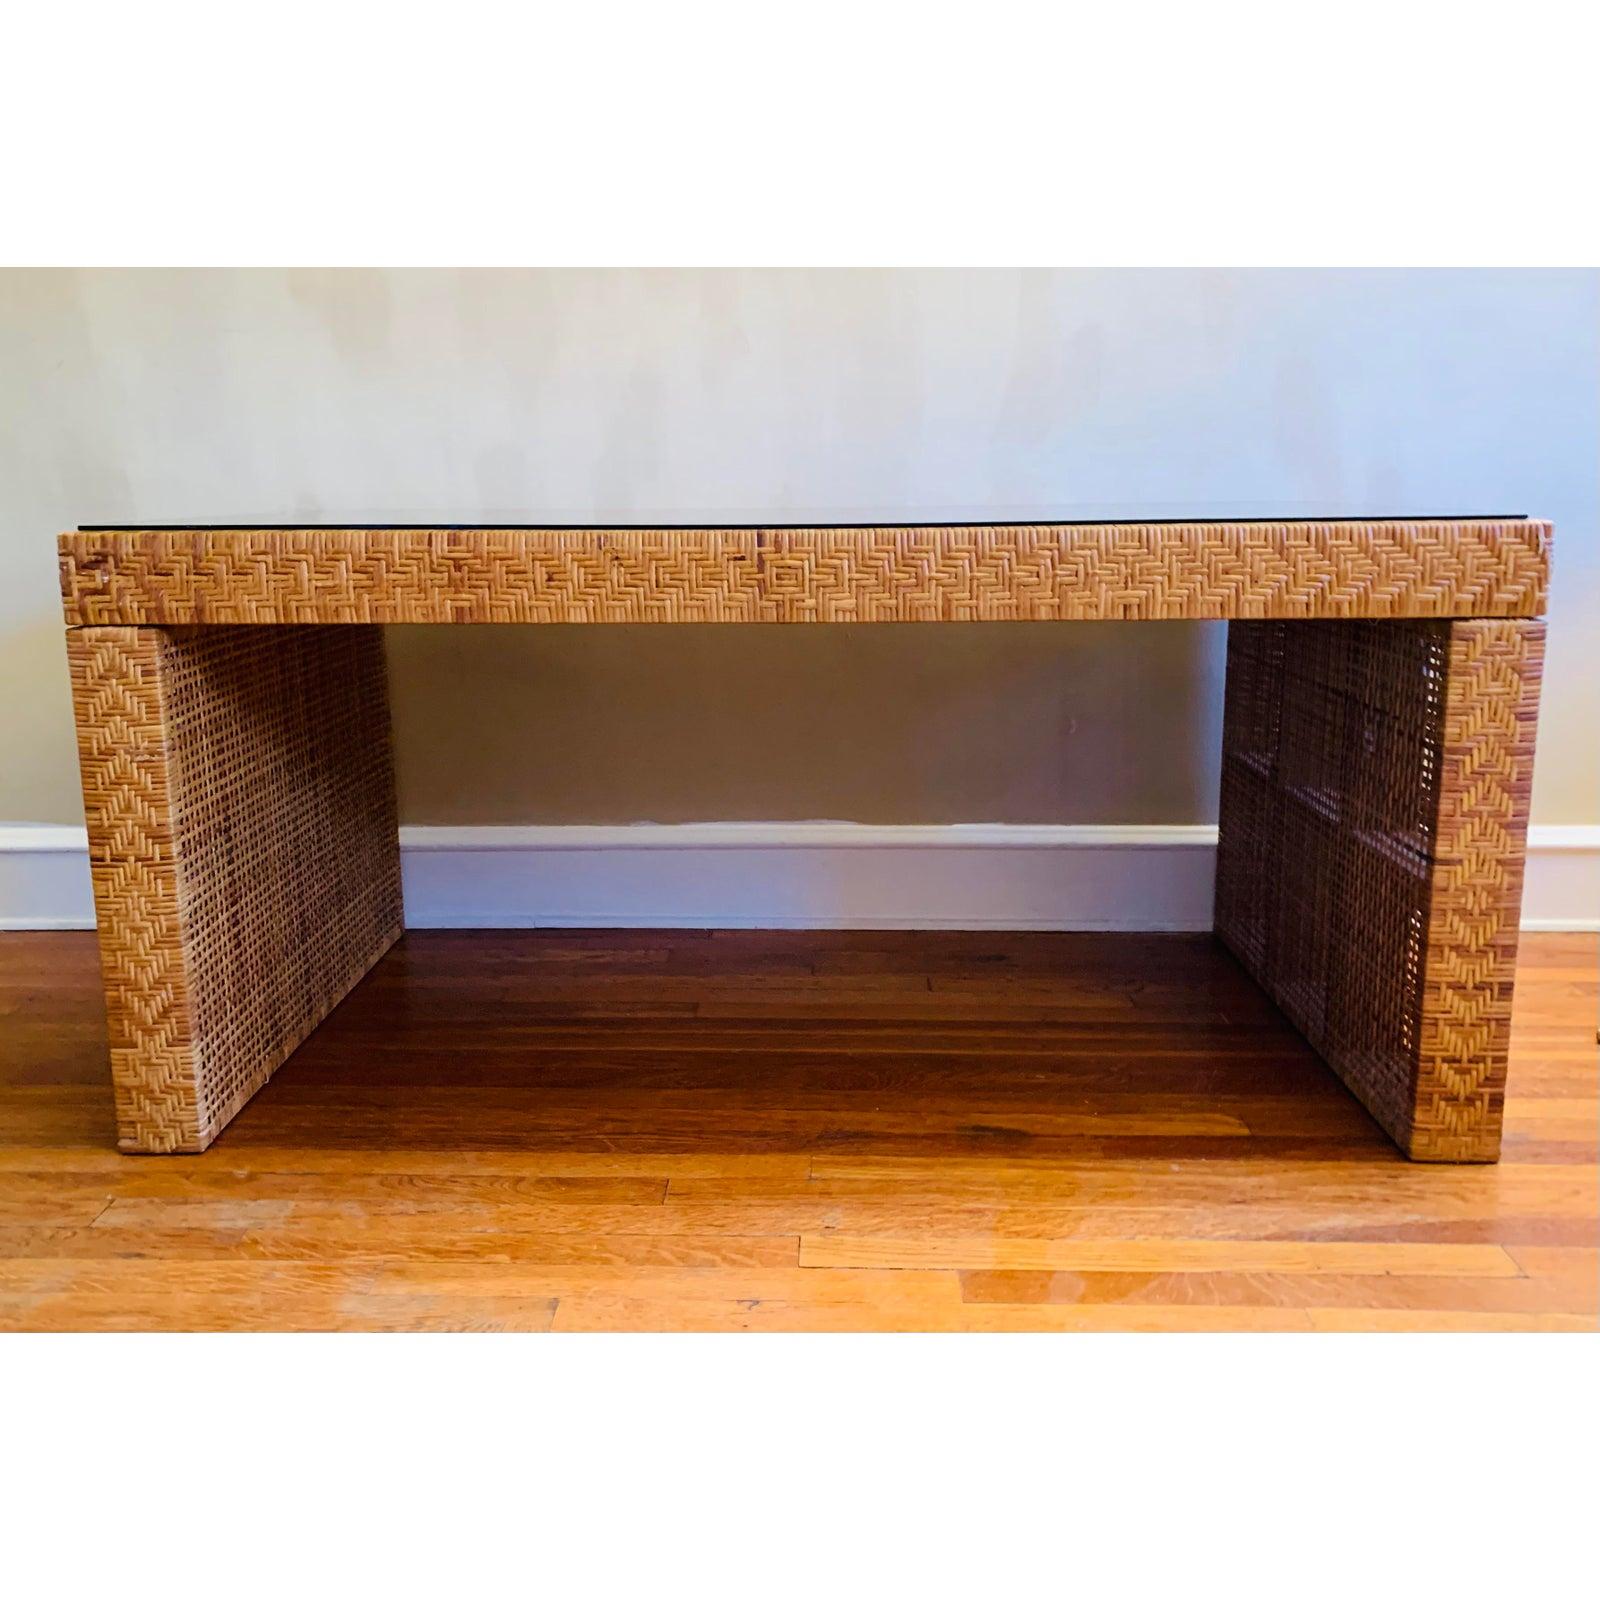 Handcrafted in the 1960s or early 1970s. Truly excellent condition.

This table has a piece of smoked glass that was cut for the top- we much prefer how it looks without it (so that one may see the craftsmanship).

Of course, woven rattan makes